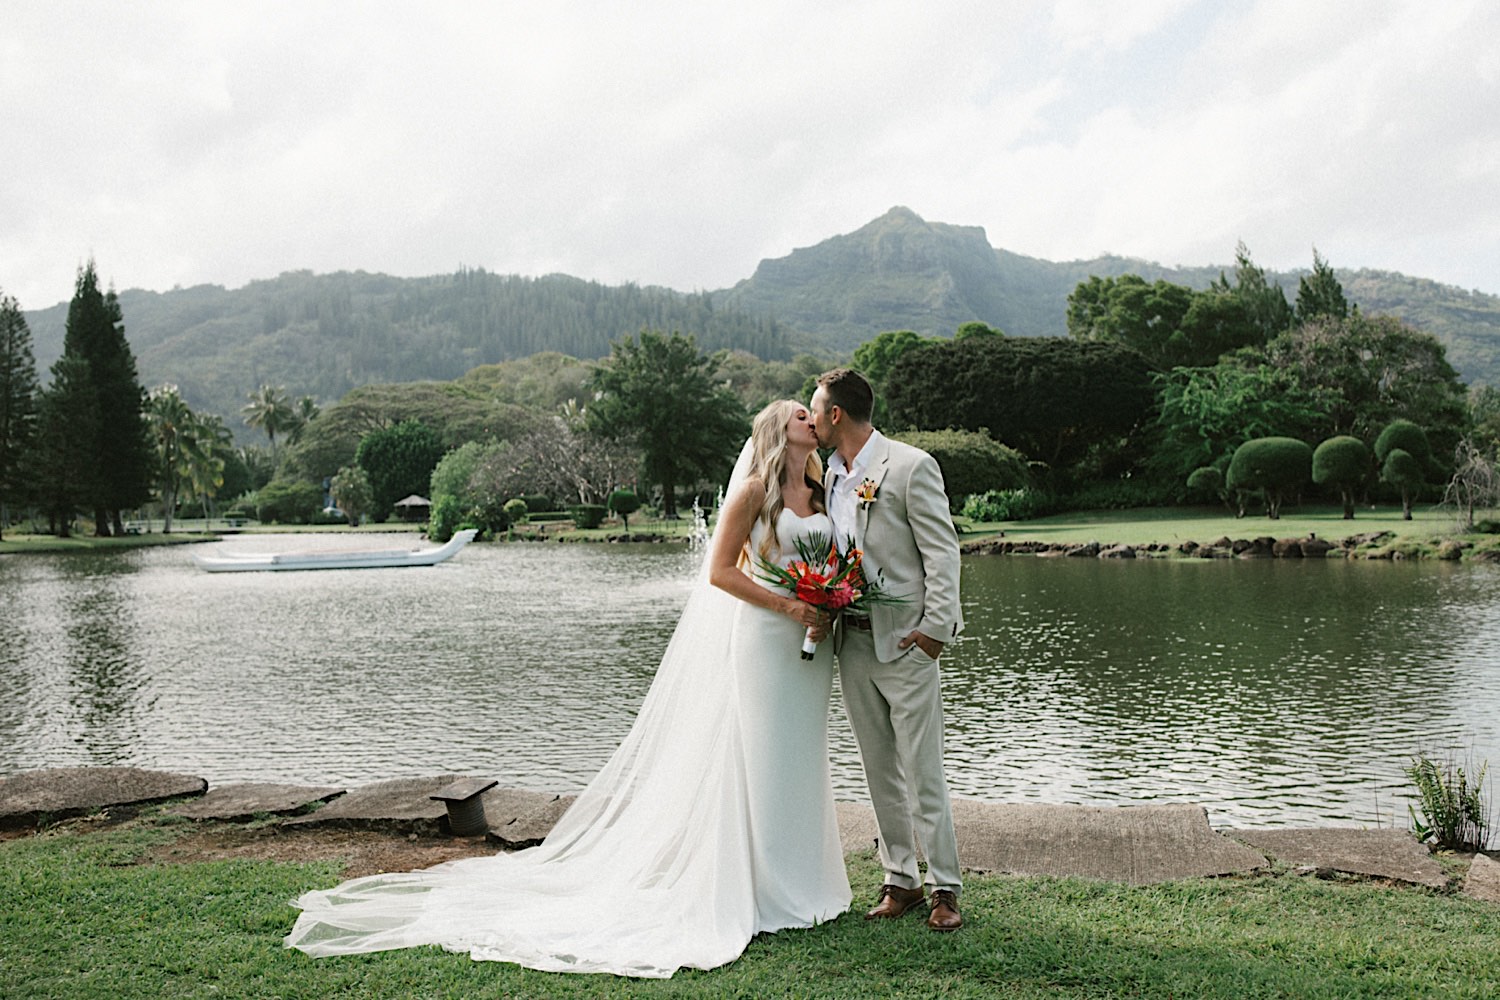 A bride and groom kiss one another in front of a lake, palm trees, and a mountain after their intimate wedding on Kauai